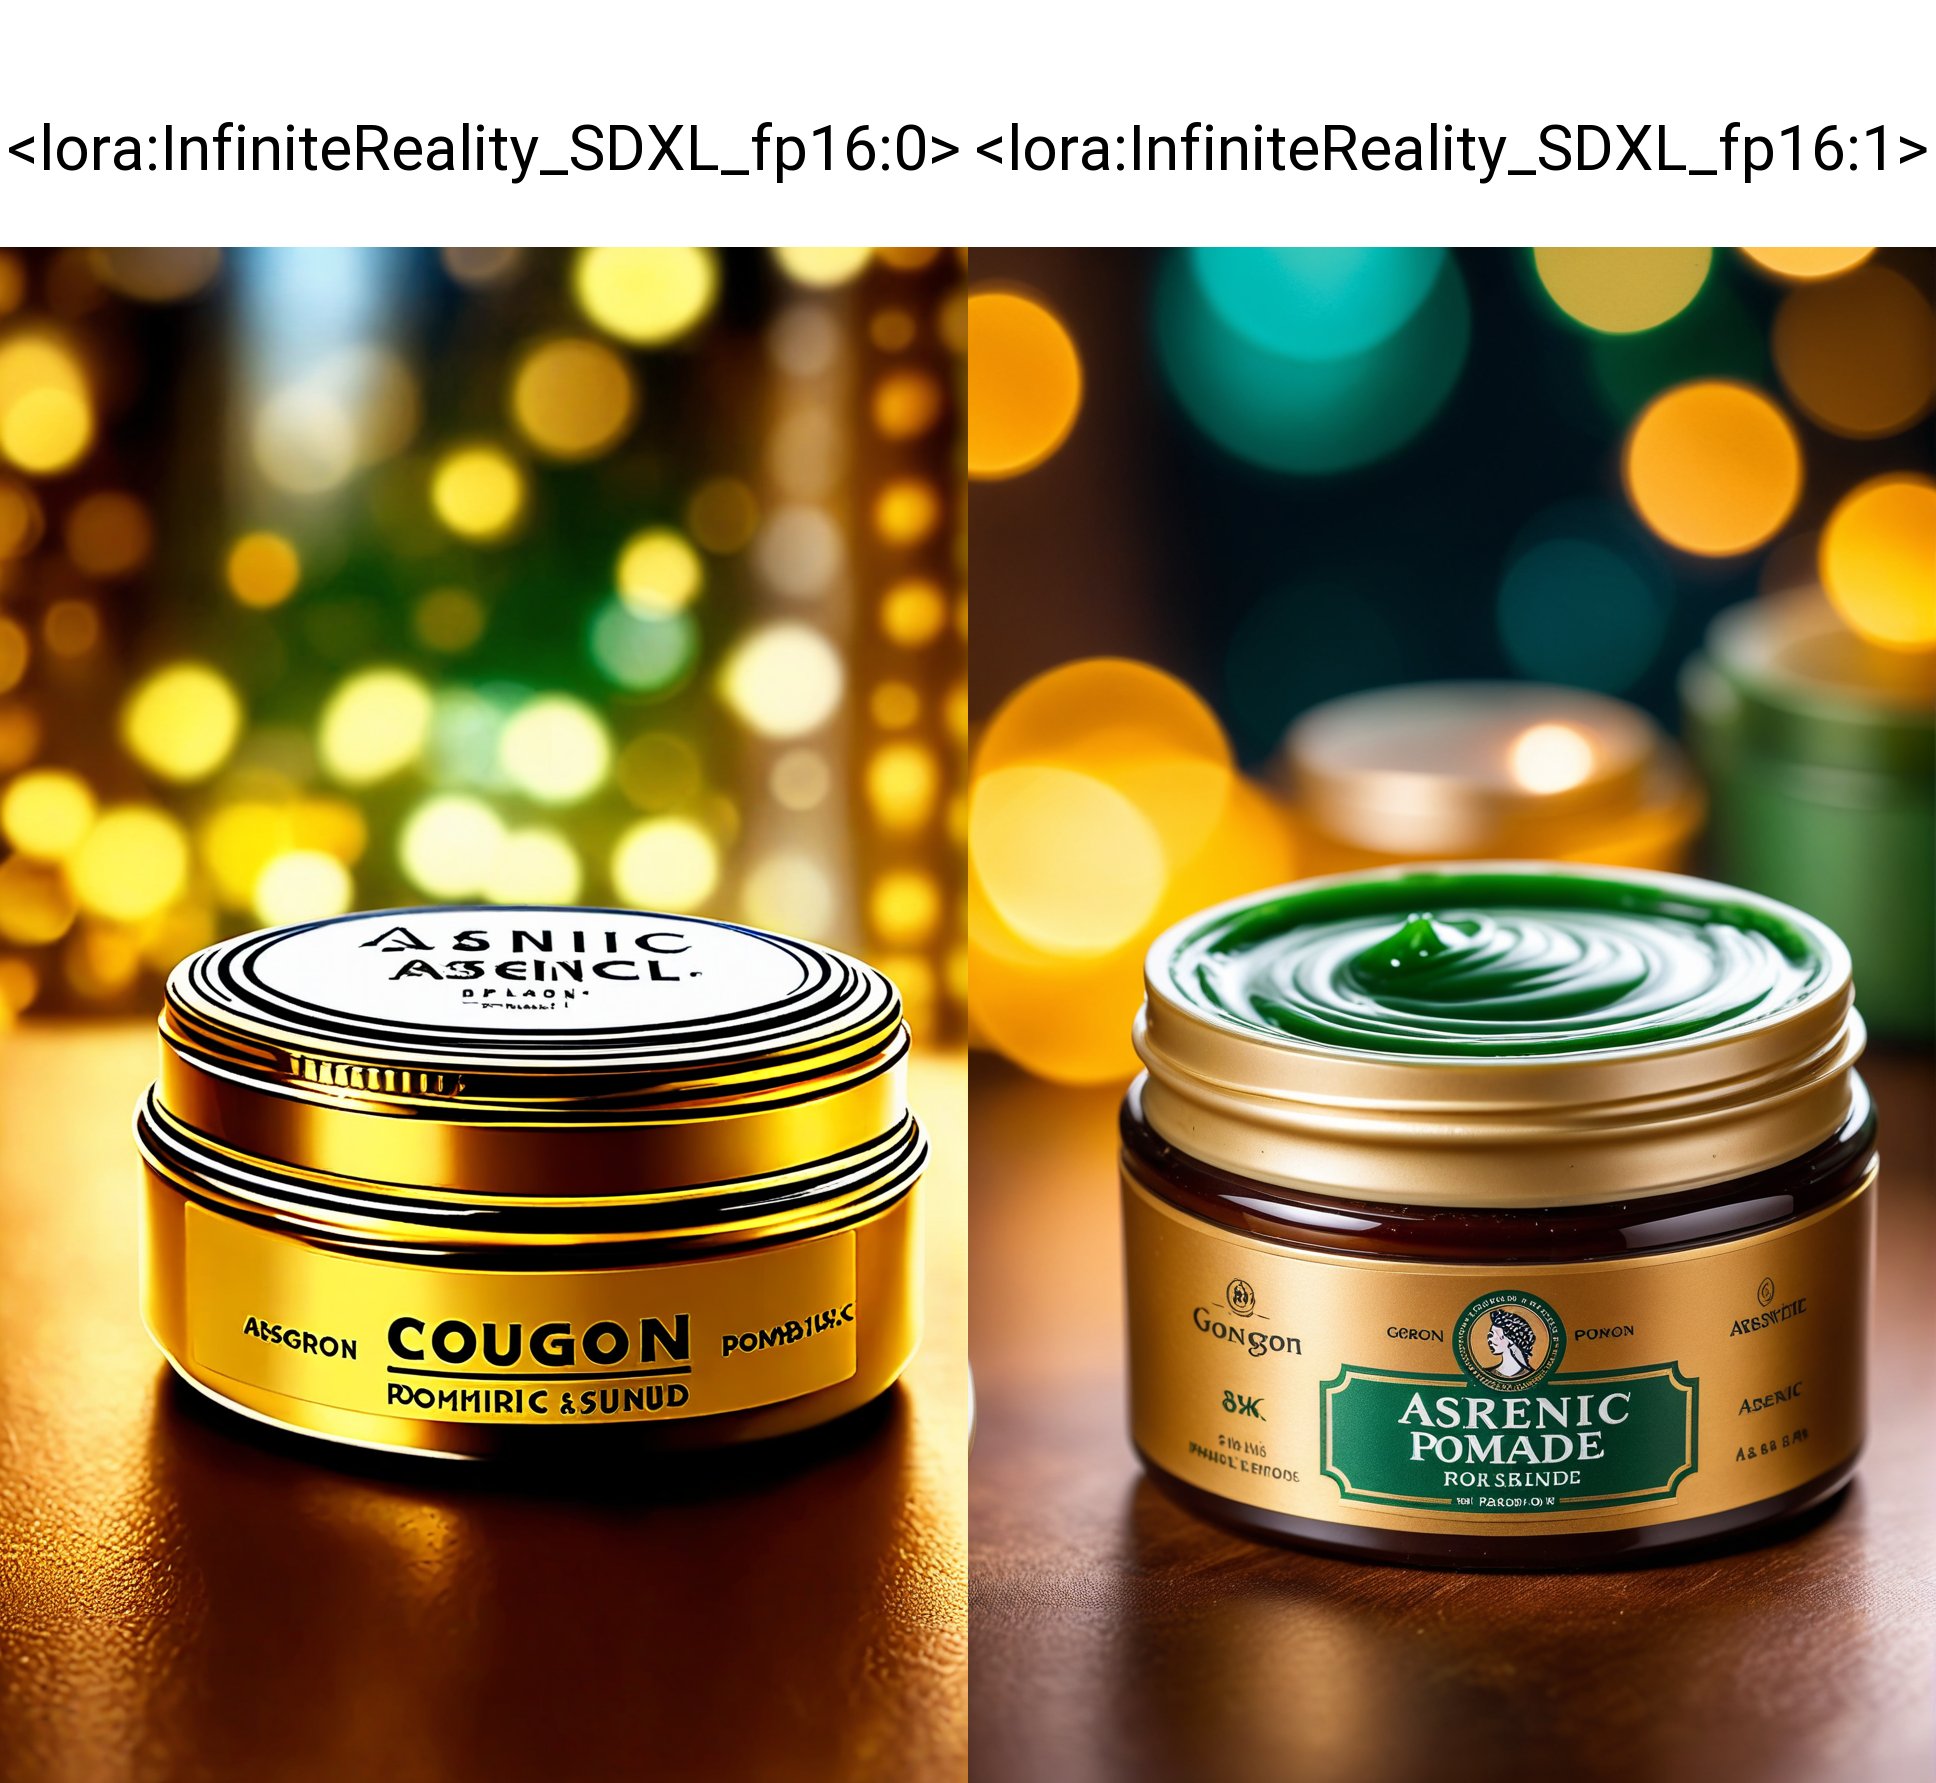 8k, extremely detailed ,, blur background, photo-realistic still life, Arsenic pomade, gorgon brand, don't use it or it will ruin your skin. Suave Classy Professional Photography, High Quality, High Details, High Resolution, 4K, (Bokeh:2.2), Backlight, Long Exposure:2.5 <lora:InfiniteReality_SDXL_fp16:0>